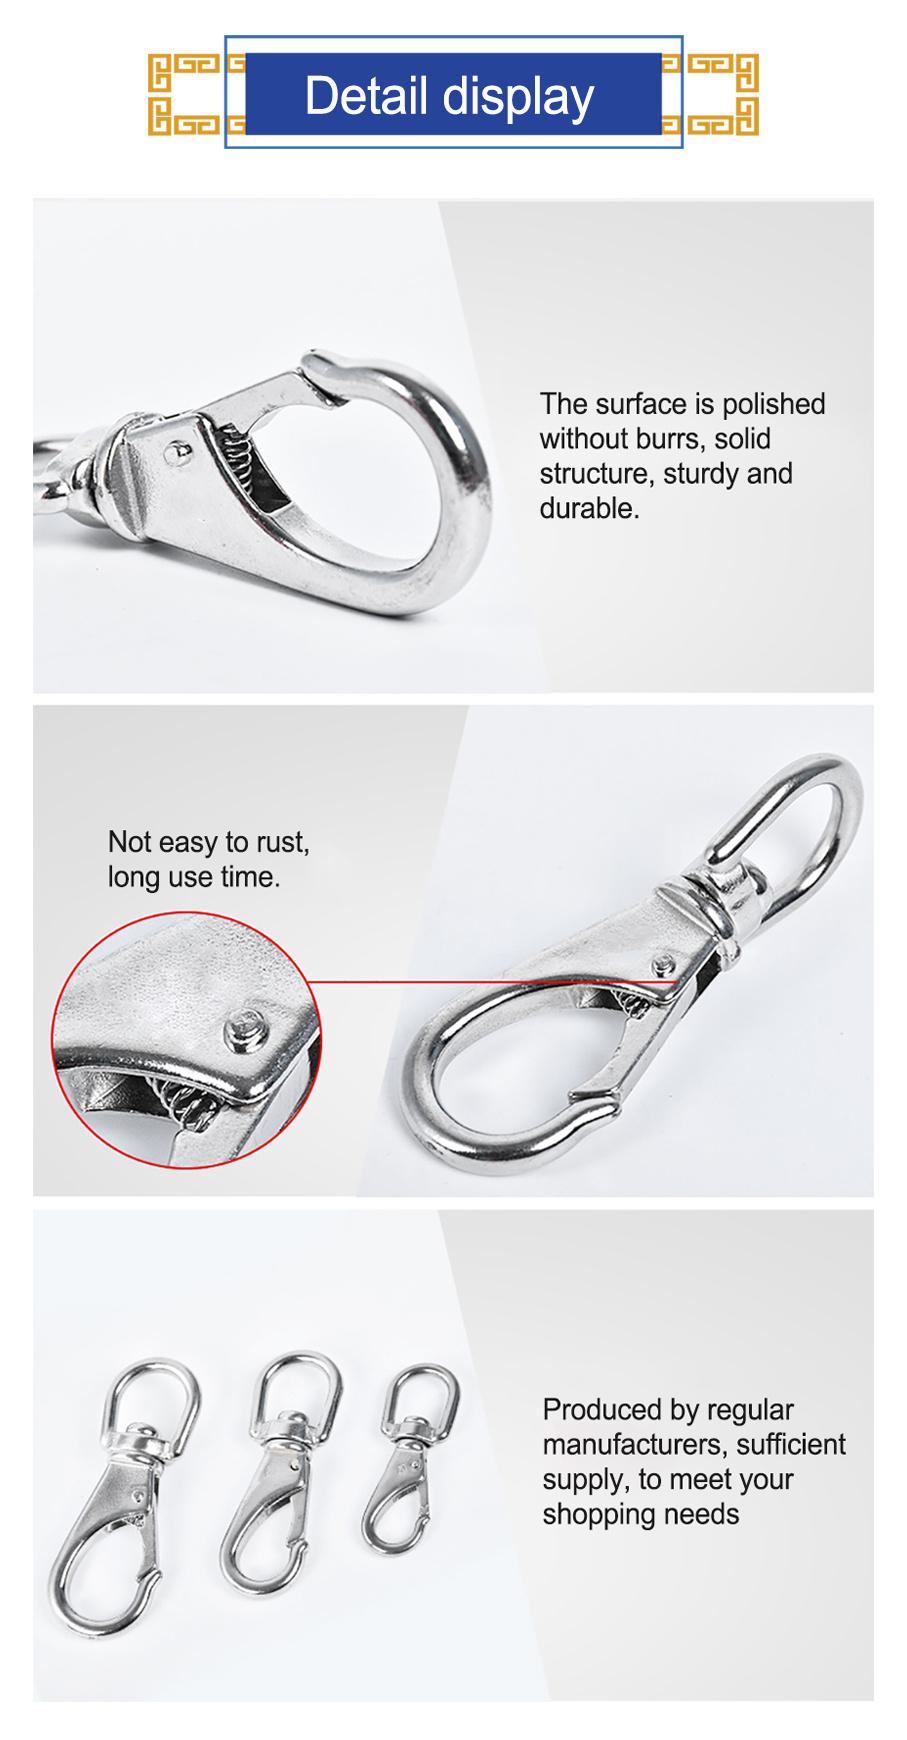 High Quality Stainless Steel 304 Spring Buckle Snap Hook Security Hook with Eyelet and Nut